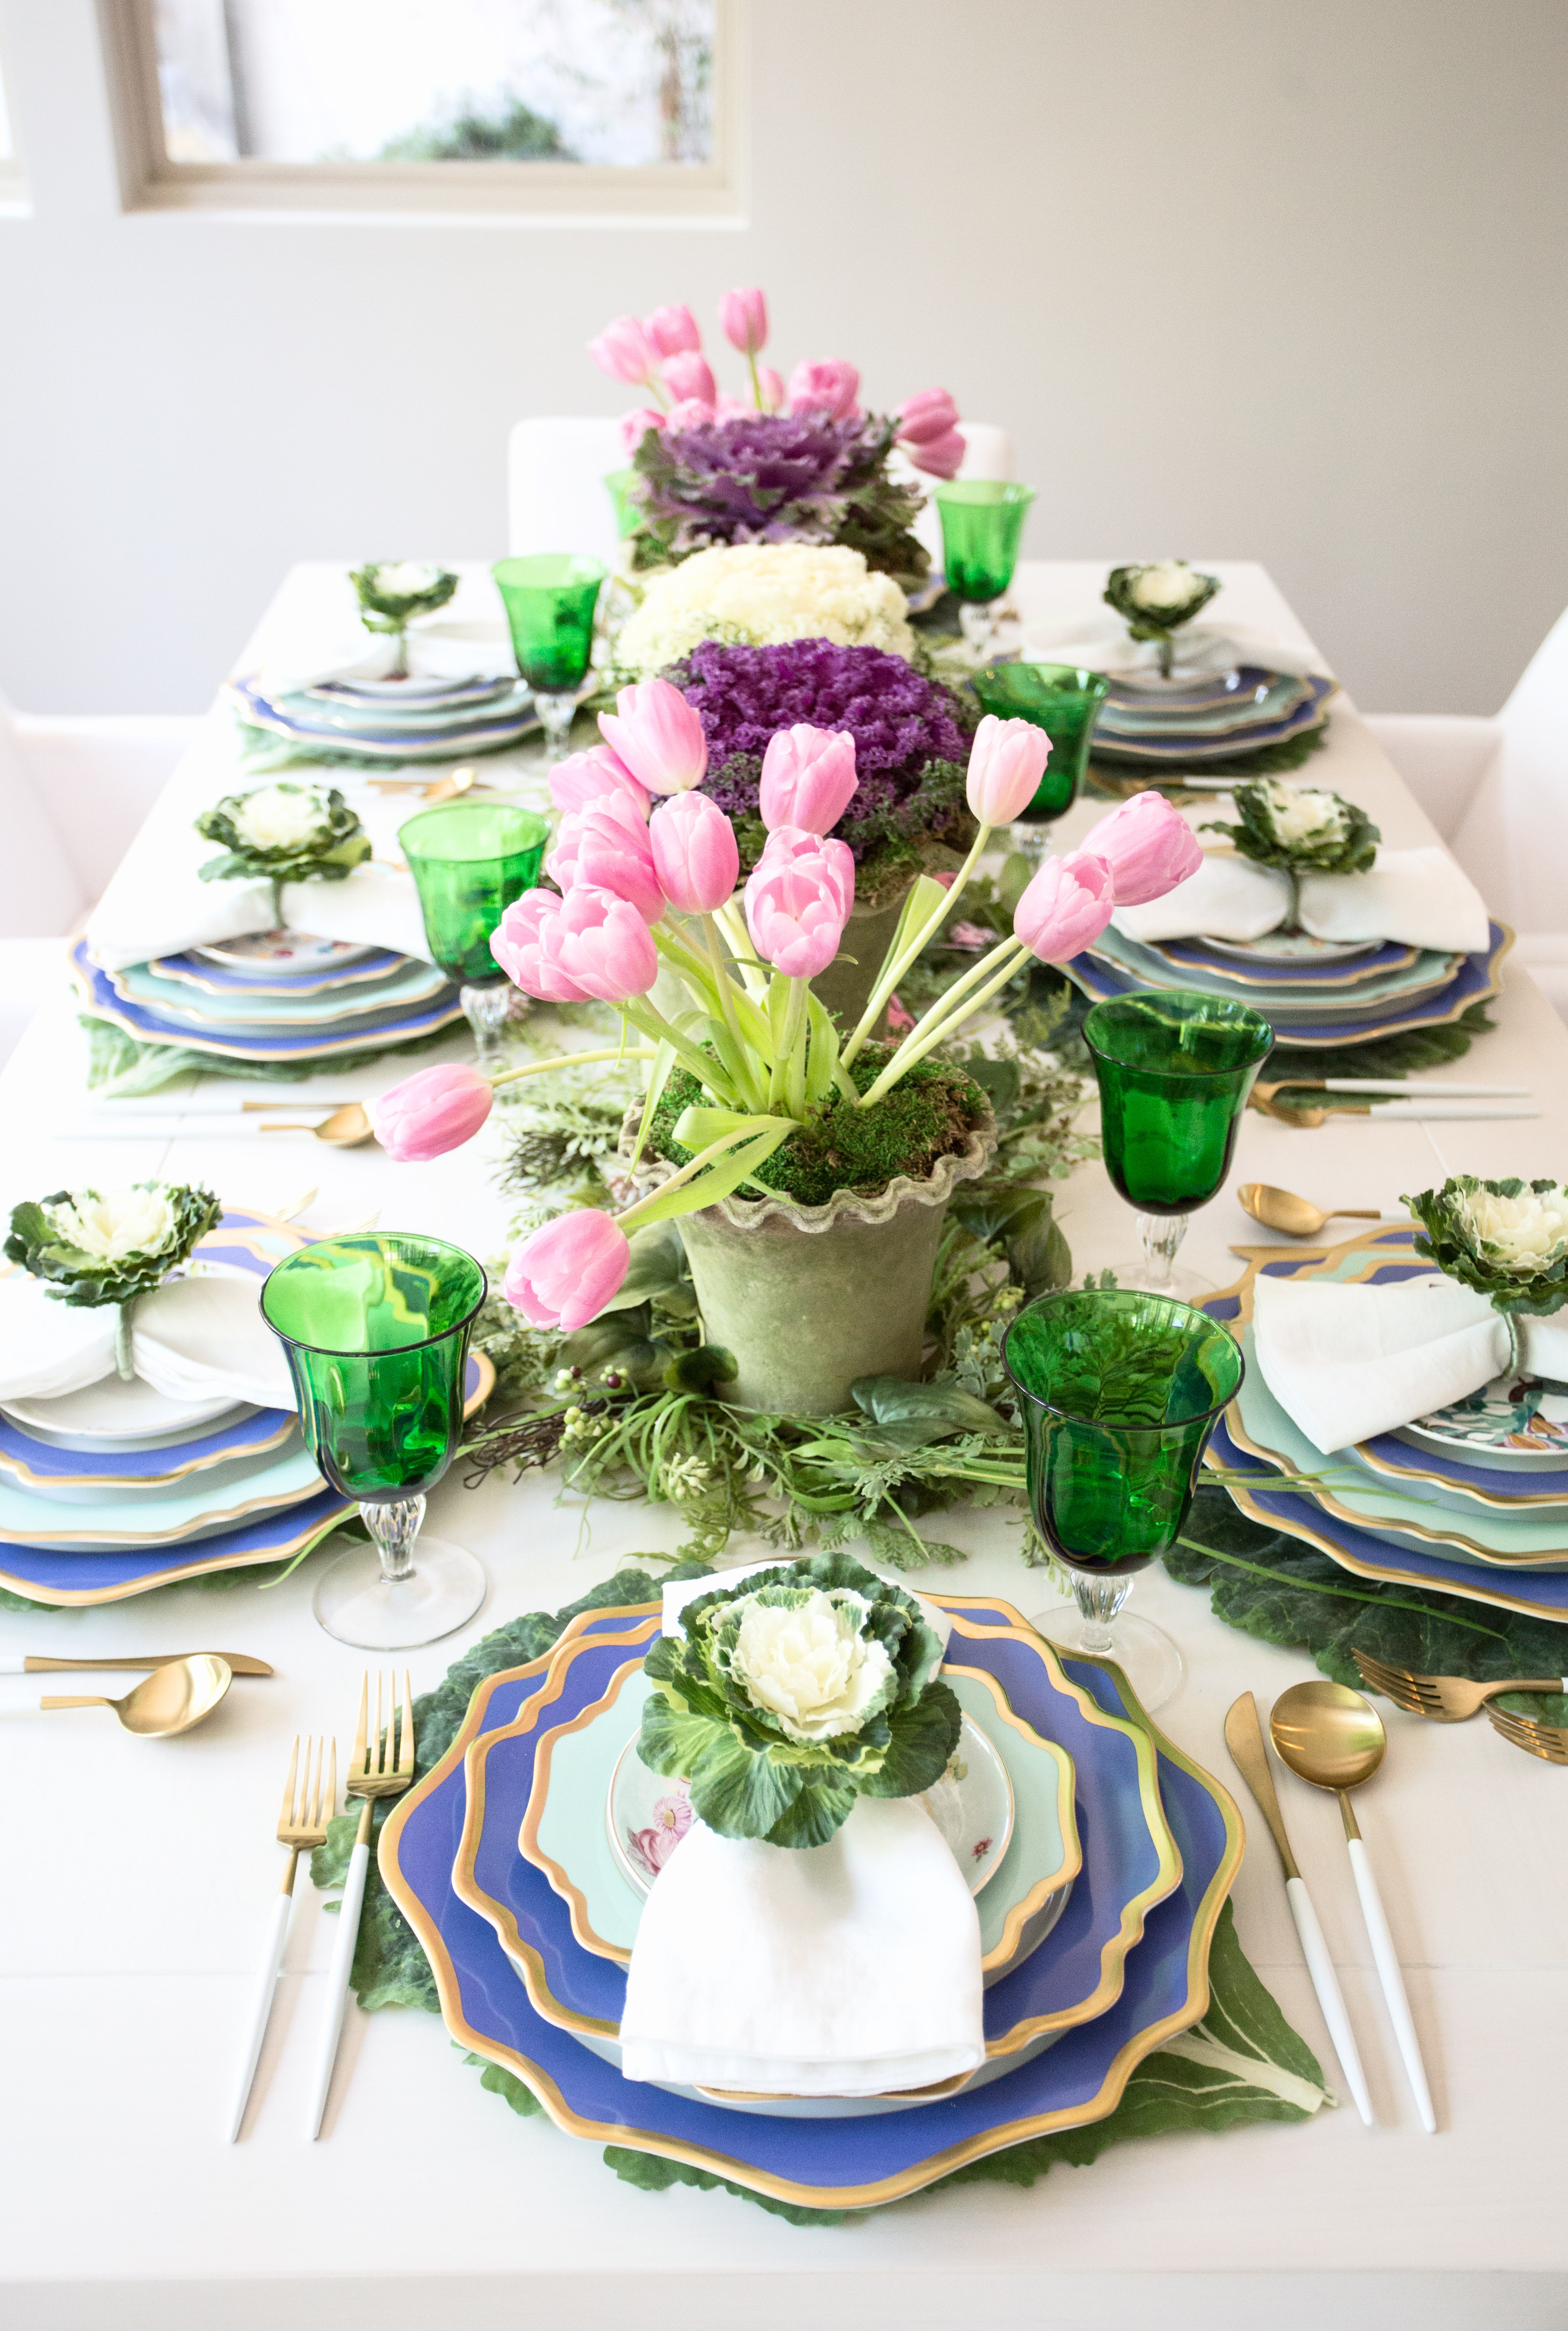 This is Your Easter Table: Pastels, Prints, Flowers and Cabbage